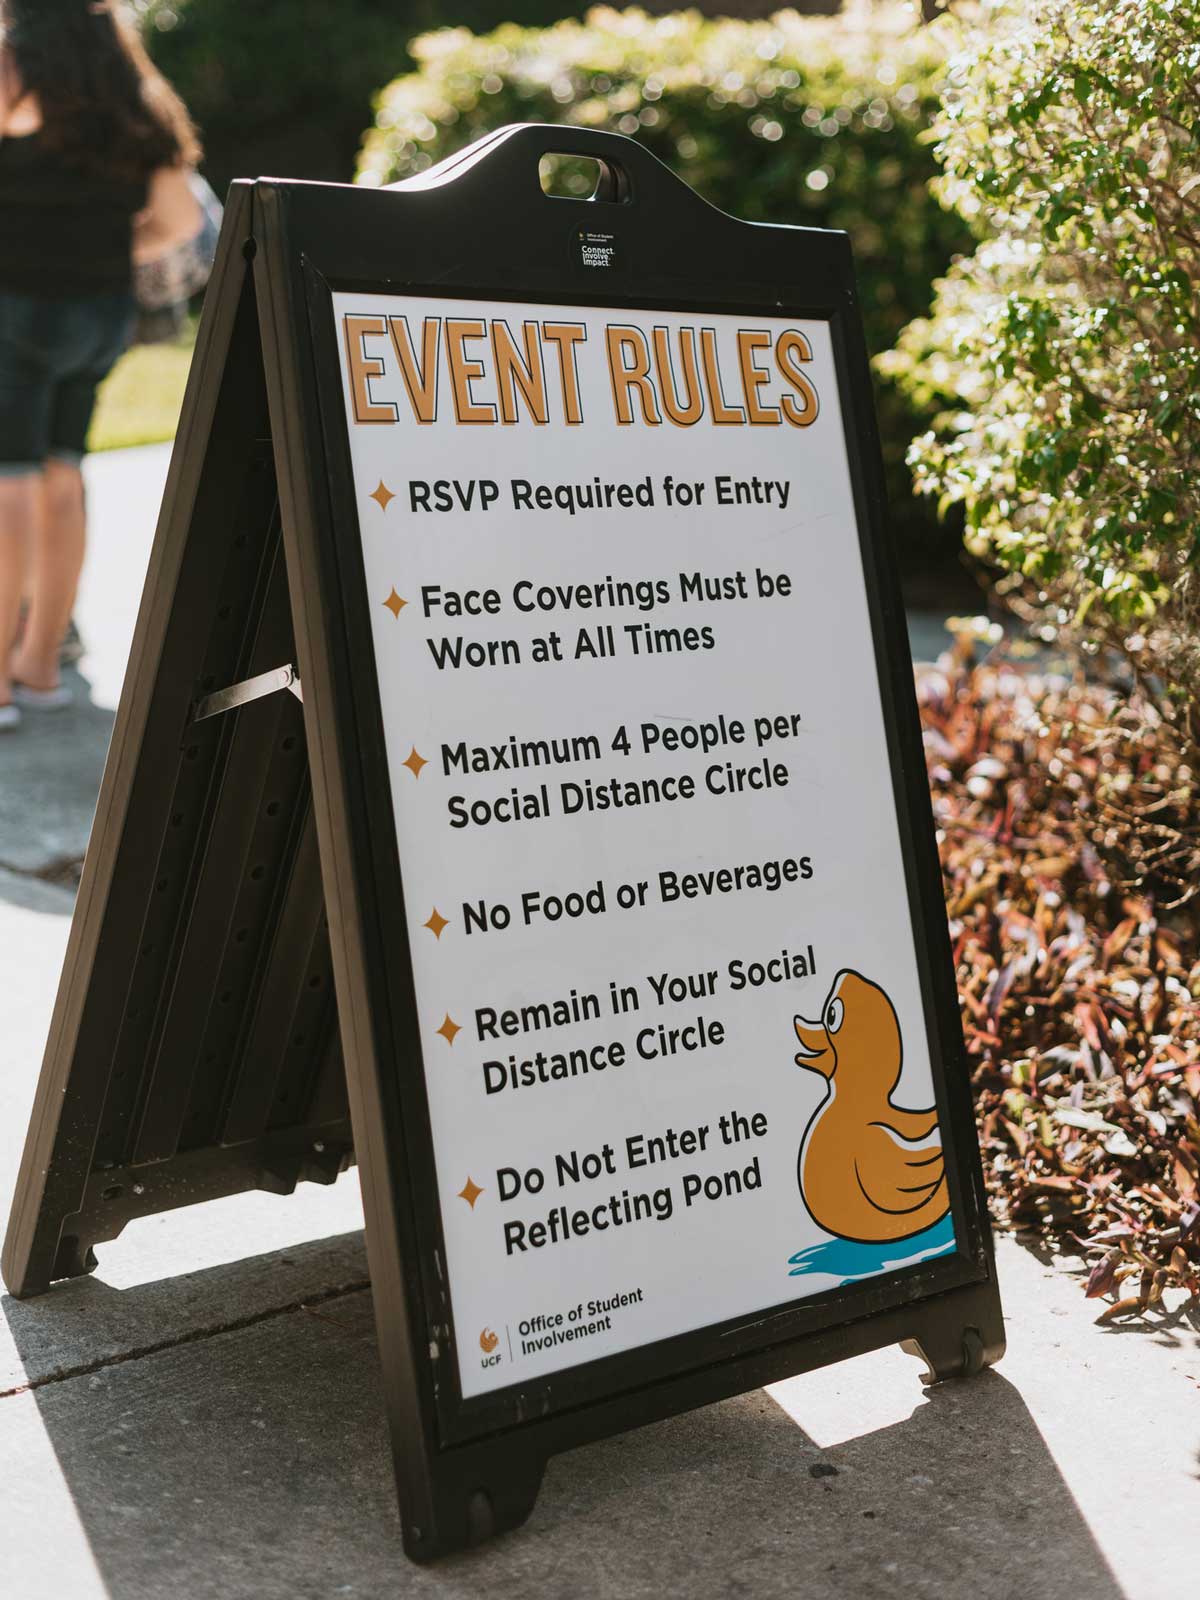 Event rules sign